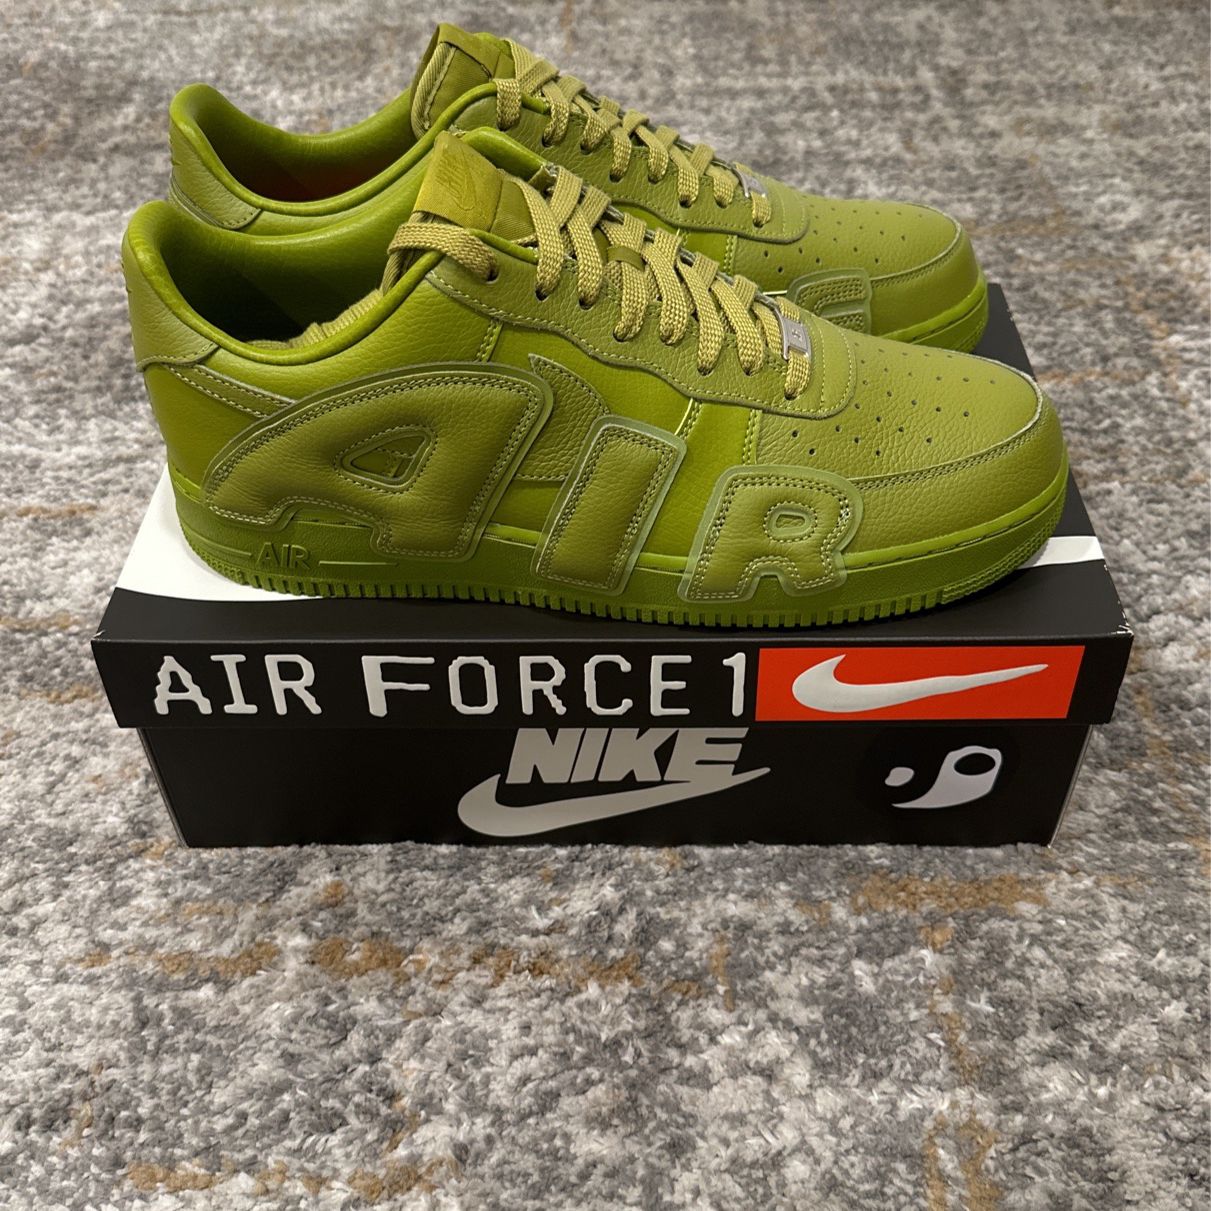 Nike x CPFM Air Force 1 “Moss” Size 13